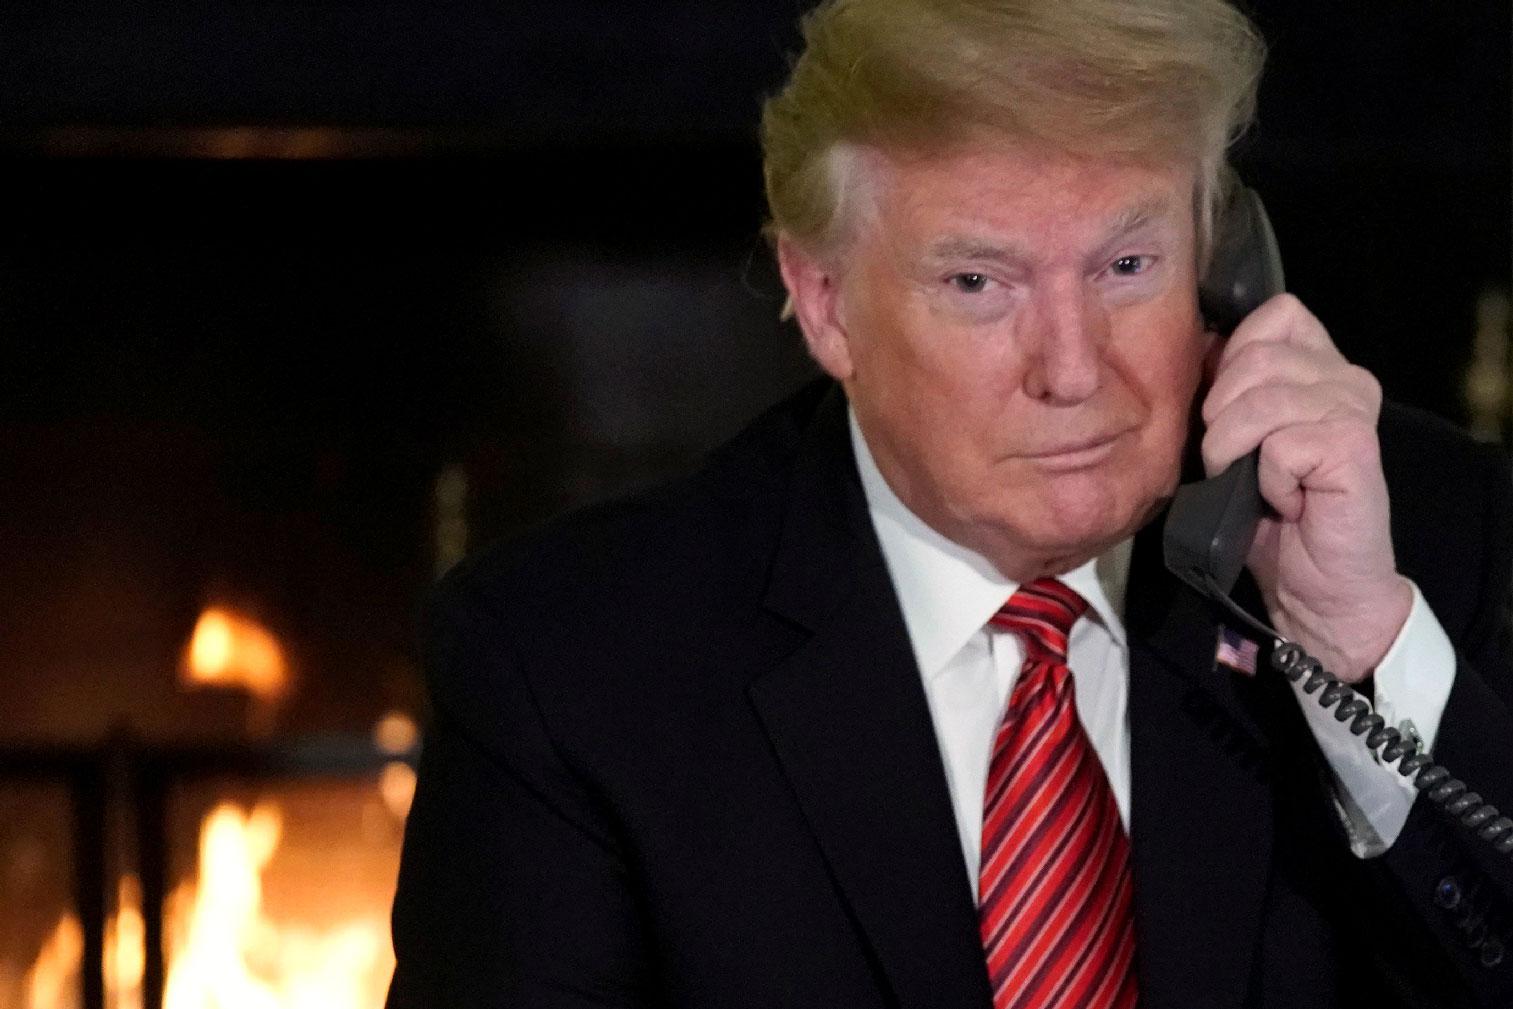 US President Donald Trump participates in NORAD Santa tracker phone calls from the White House in Washington, US December 24, 2018.